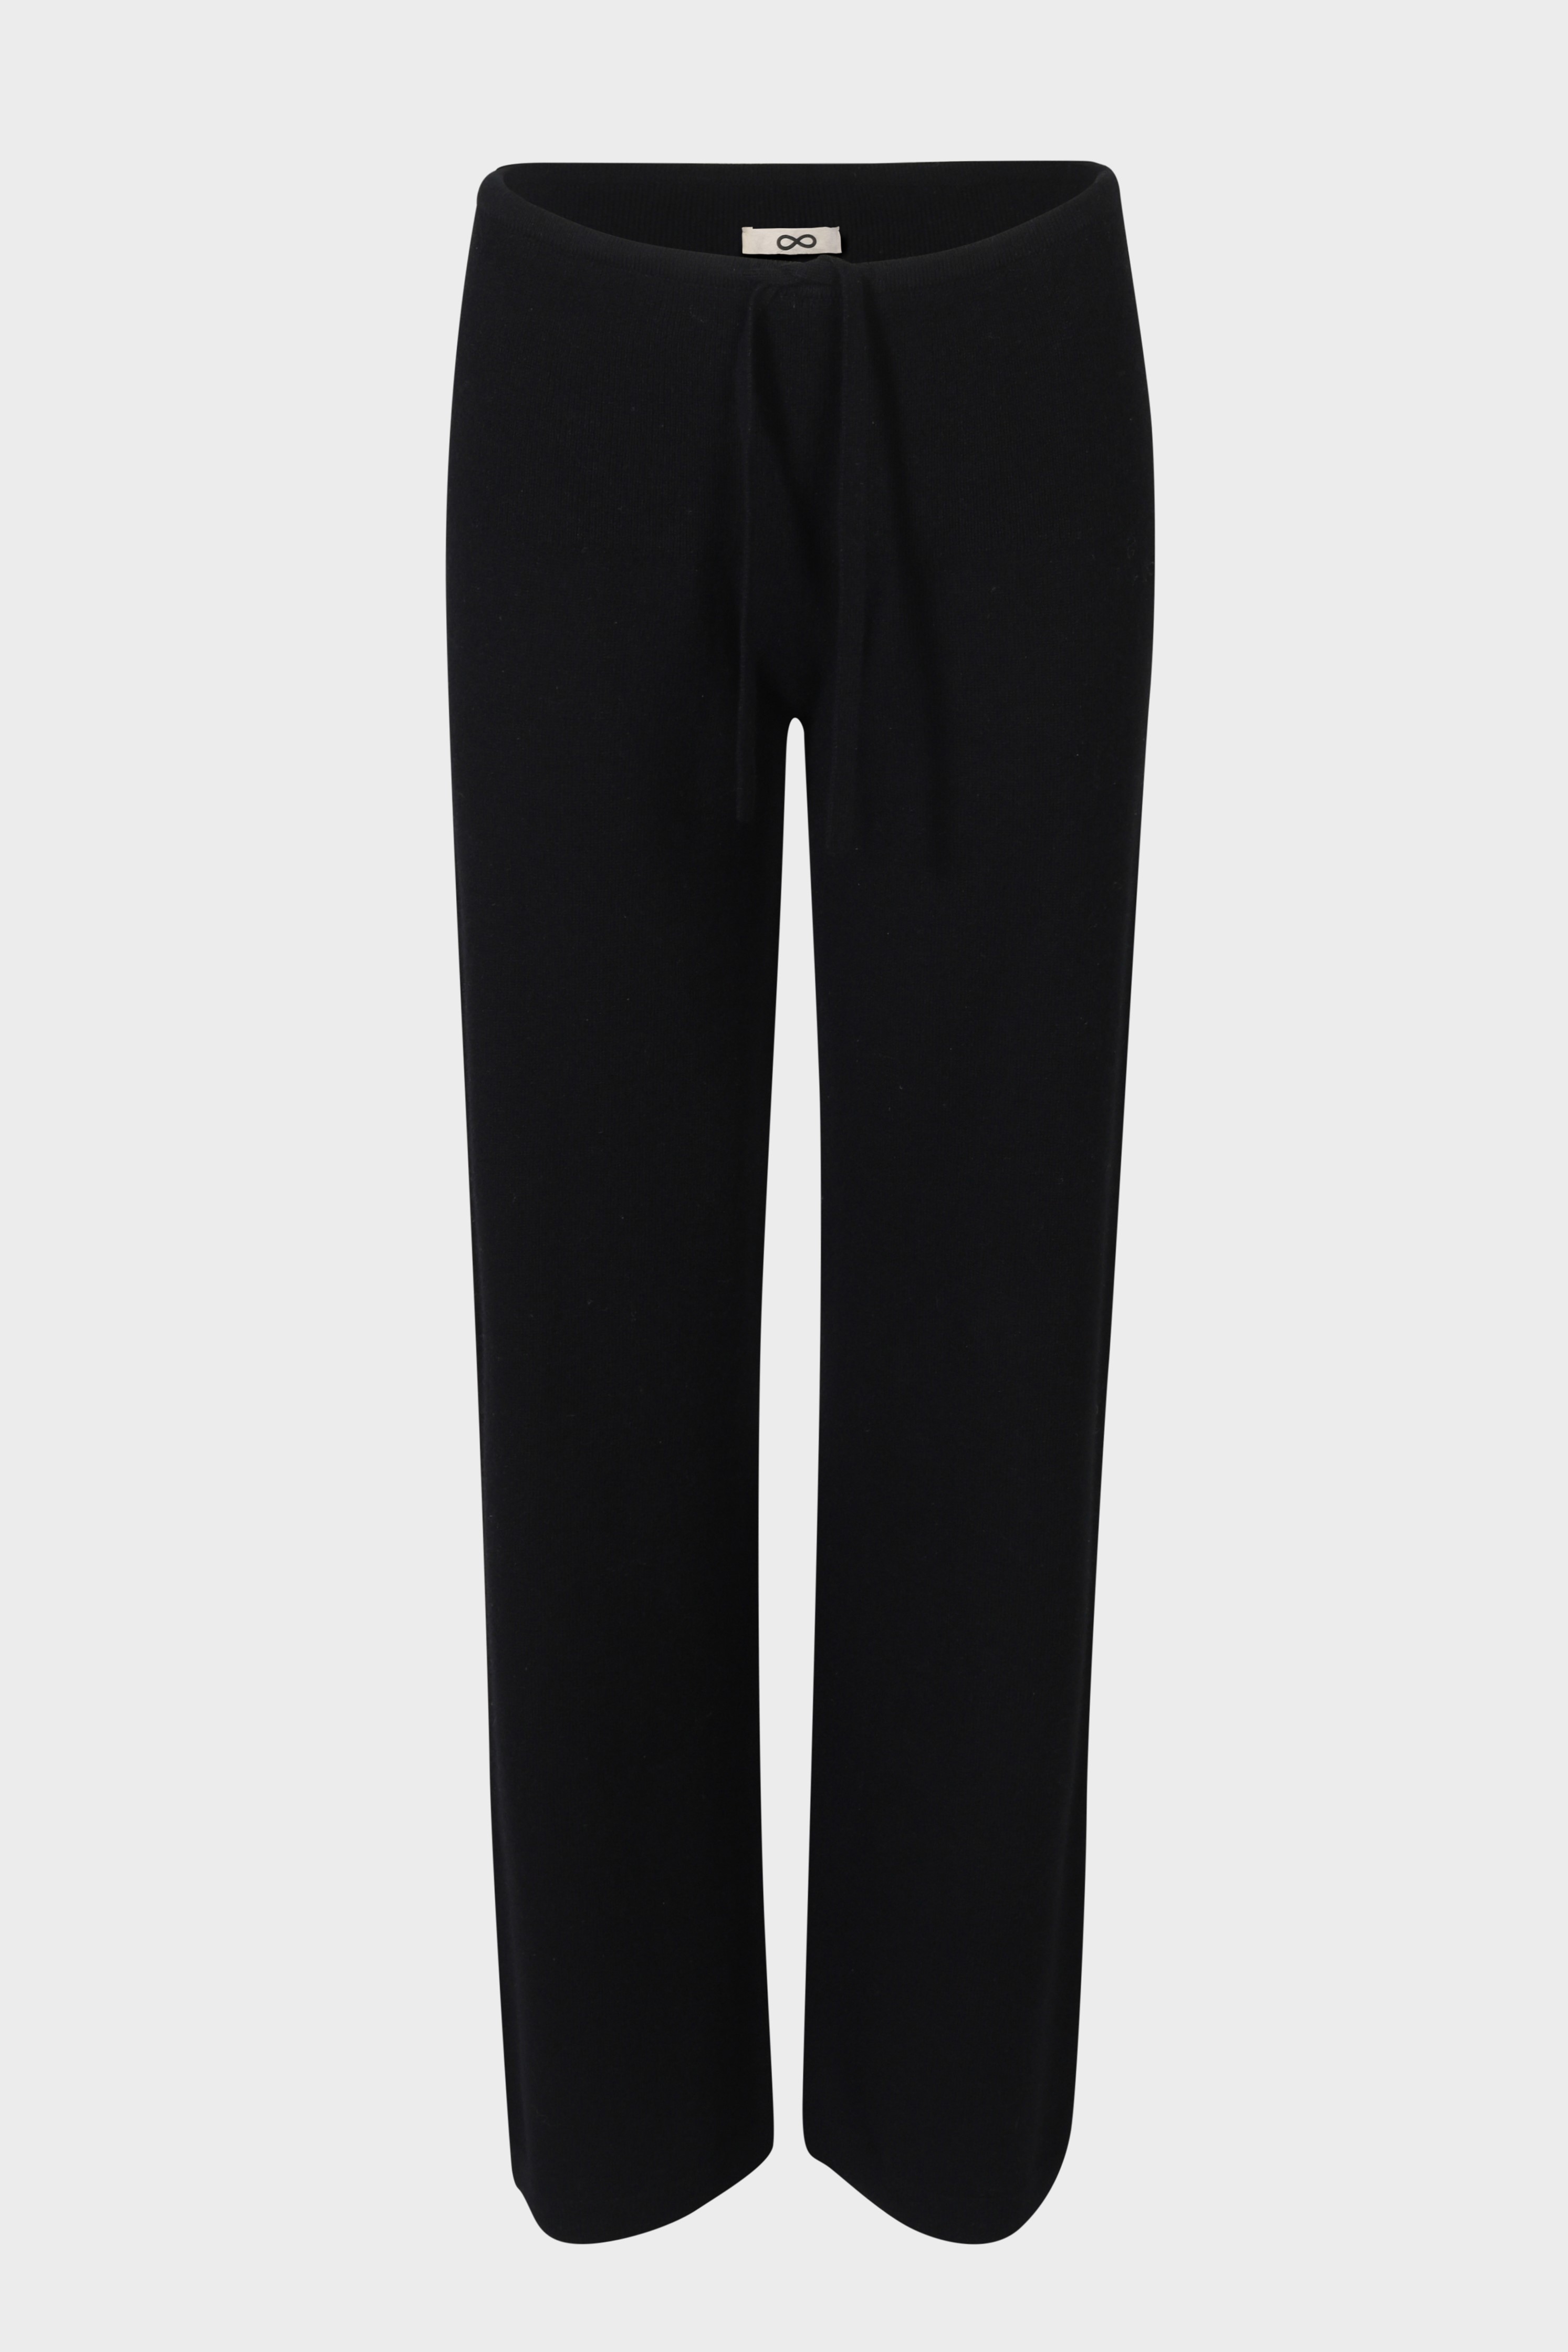 SMINFINITY Chilly Knit Pant in Black XS/S